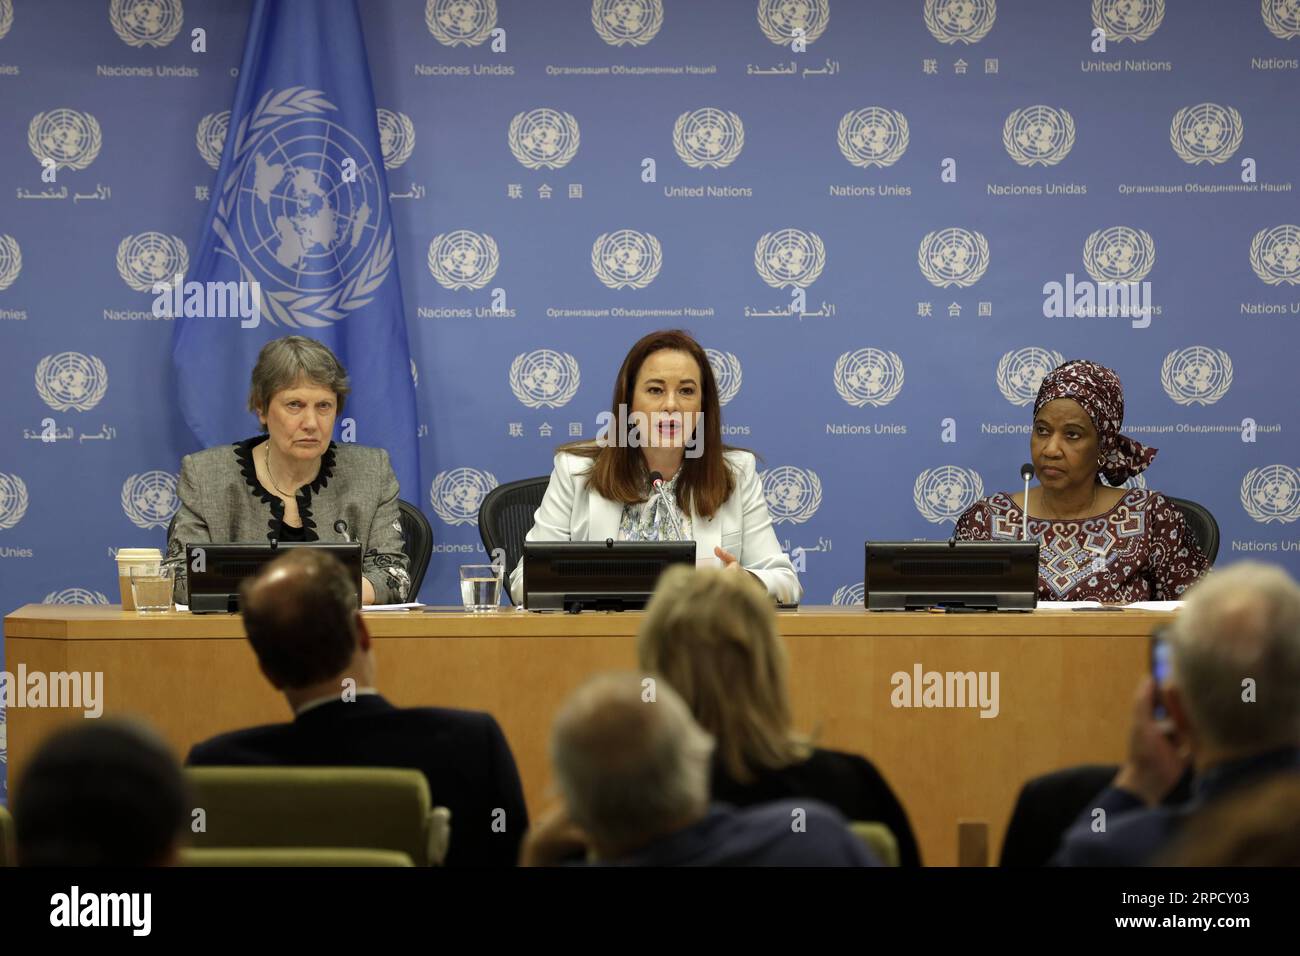 (190715) -- UNITED NATIONS, July 15, 2019 -- Former Prime Minister of New Zealand Helen Clark, United Nations General Assembly (UNGA) President Maria Fernanda Espinosa Garces and Executive Director of UN Women Phumzile Mlambo-Ngcuka (from L to R) attend a press briefing on gender equality and women s leadership for a sustainable world, at the UN headquarters in New York, July 15, 2019. UN General Assembly President Maria Fernanda Espinosa Garces on Monday called on the international community to support women s rights and empowerment. ) UN-UNGA PRESIDENT-GENDER EQUALITY-WOMEN S LEADERSHIP-PRES Stock Photo